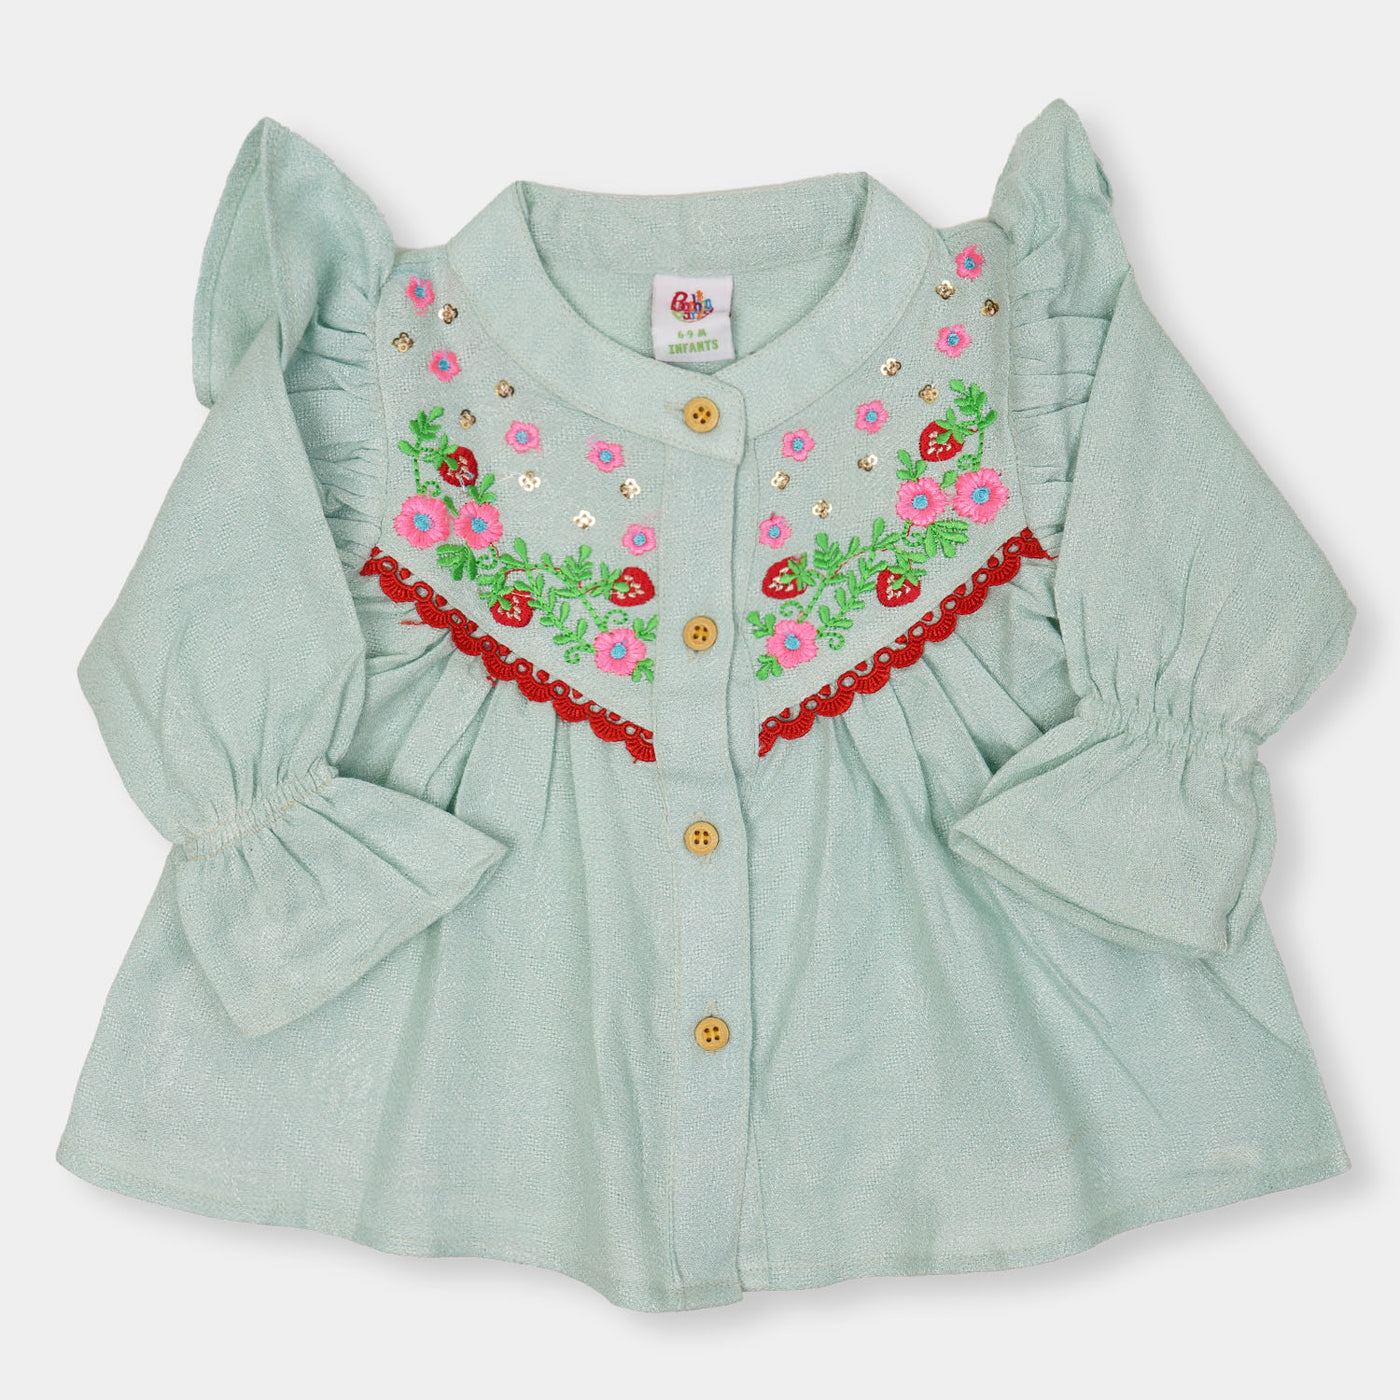 Infant Girls Embroidered Top Strawberry Girl - Mint